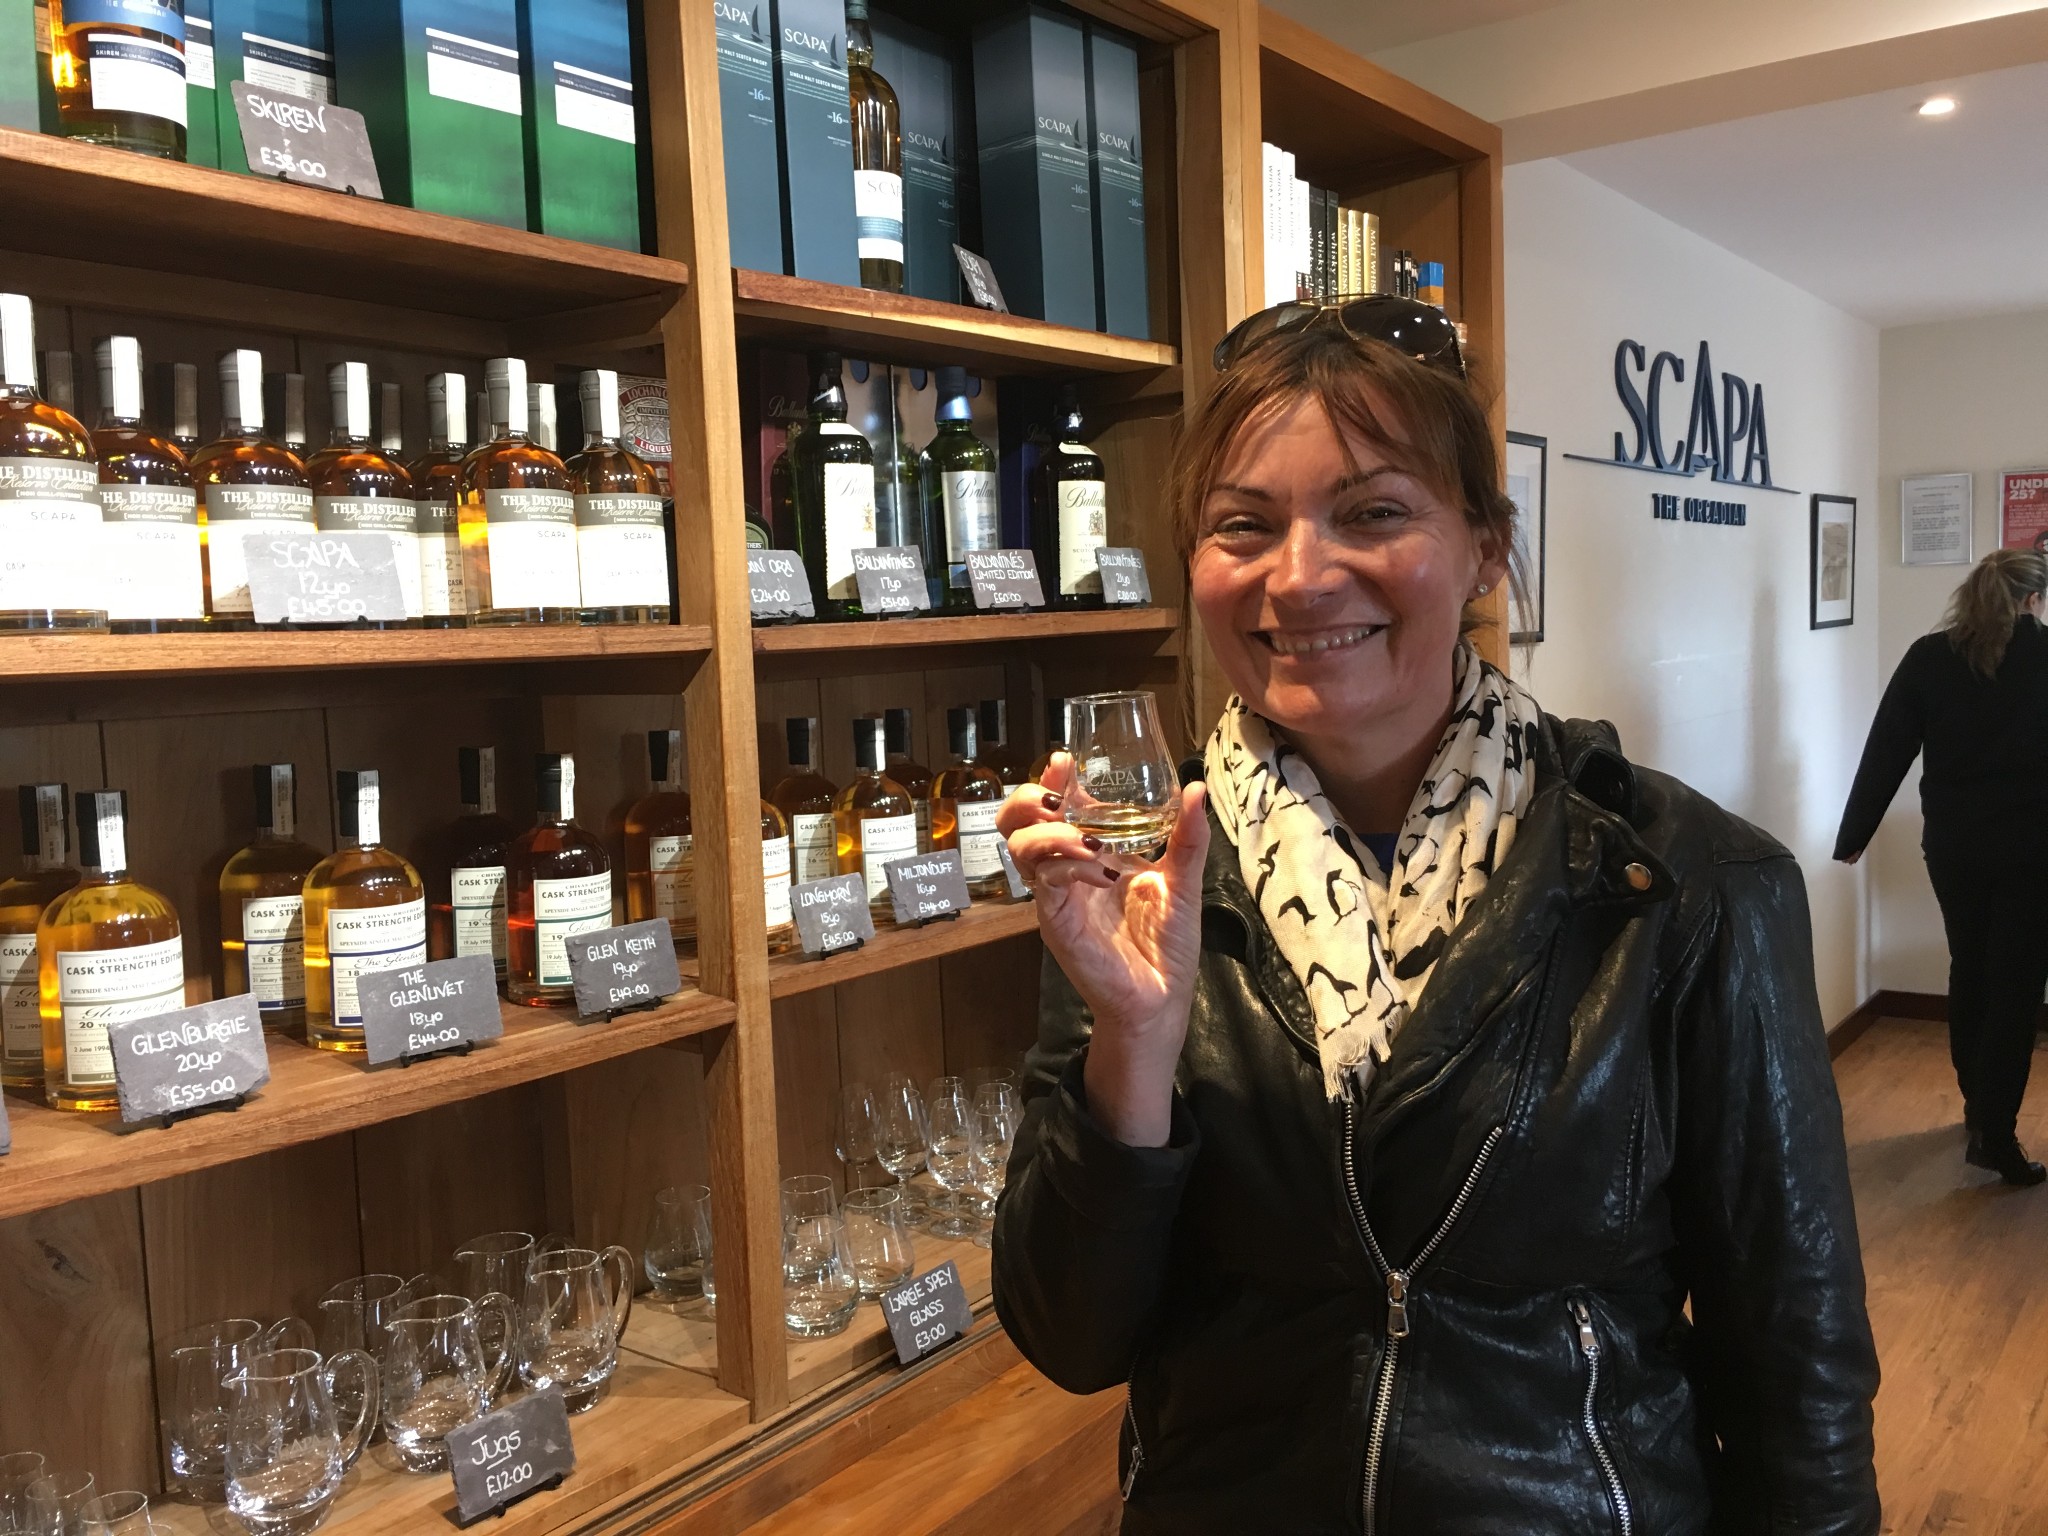 Whisky tasting at Scapa Distillery - image courtesy of Lorraine Kelly